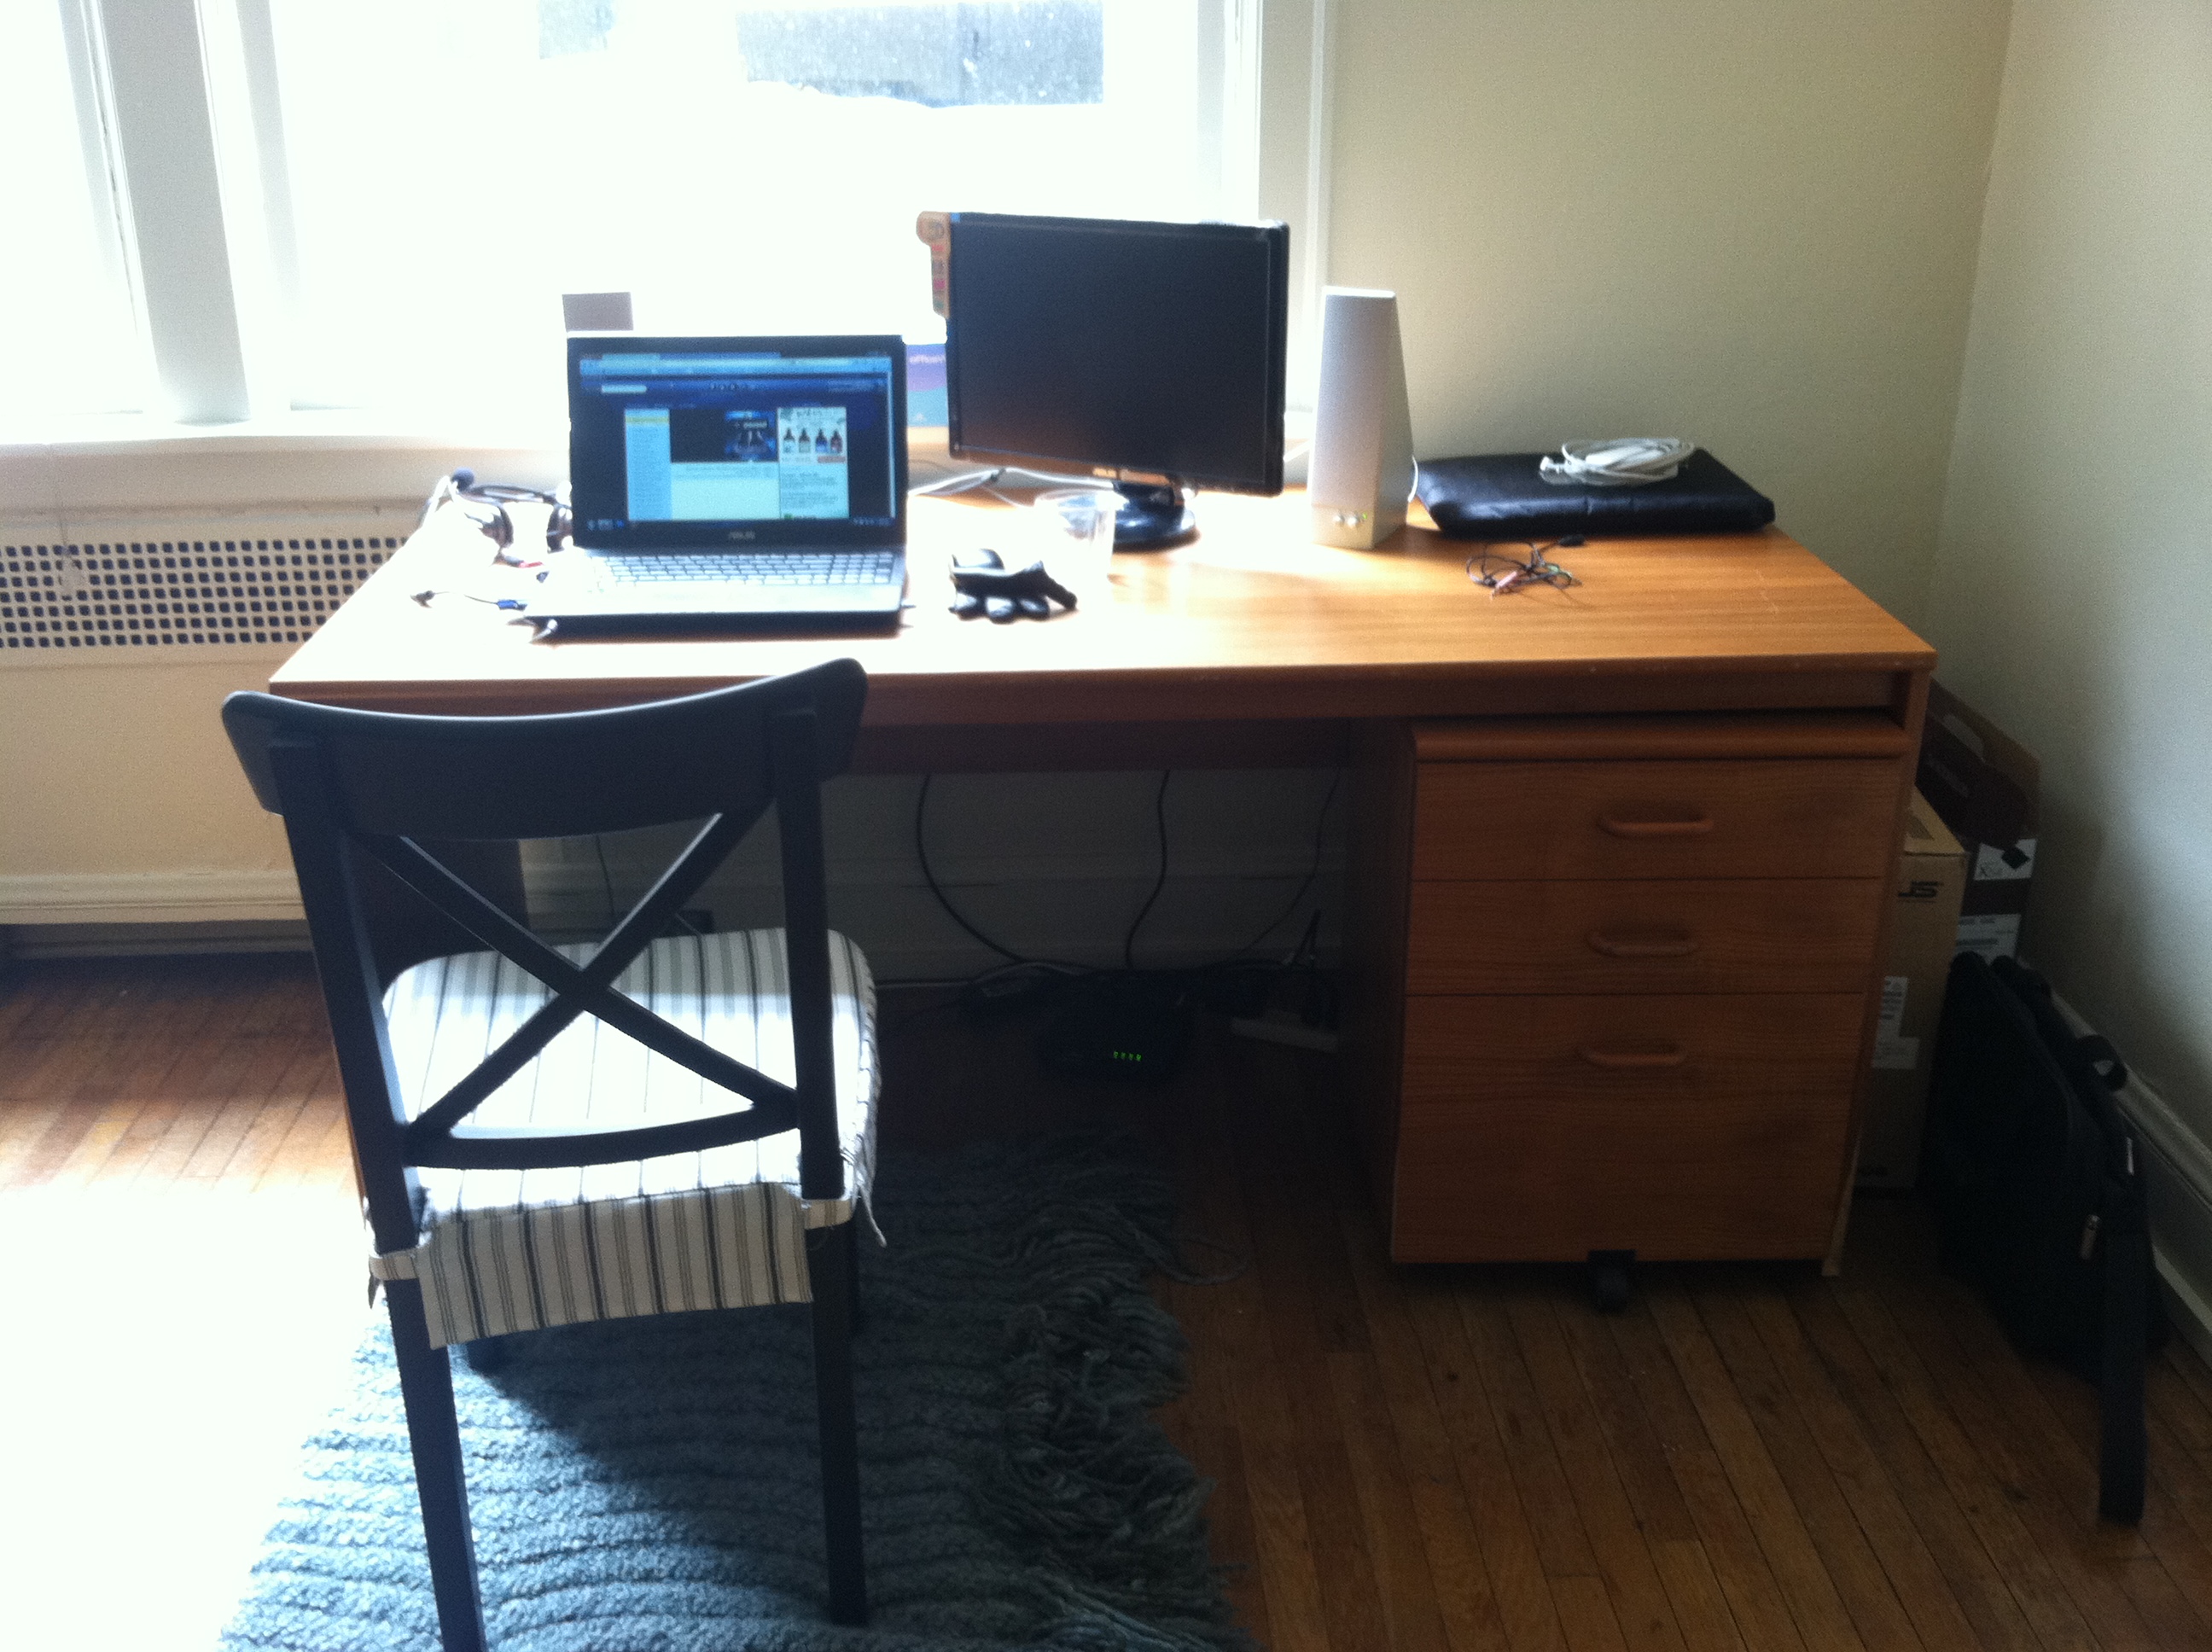 Large wooden desk in the corner of a bare studio apartment. It has a laptop and small monitor on it. The mouse wristrest is an old rolled-up glove. The chair is a black kitchen chair from Ikea. Through the window you can make out the window frame of the next door apartment I faced into.